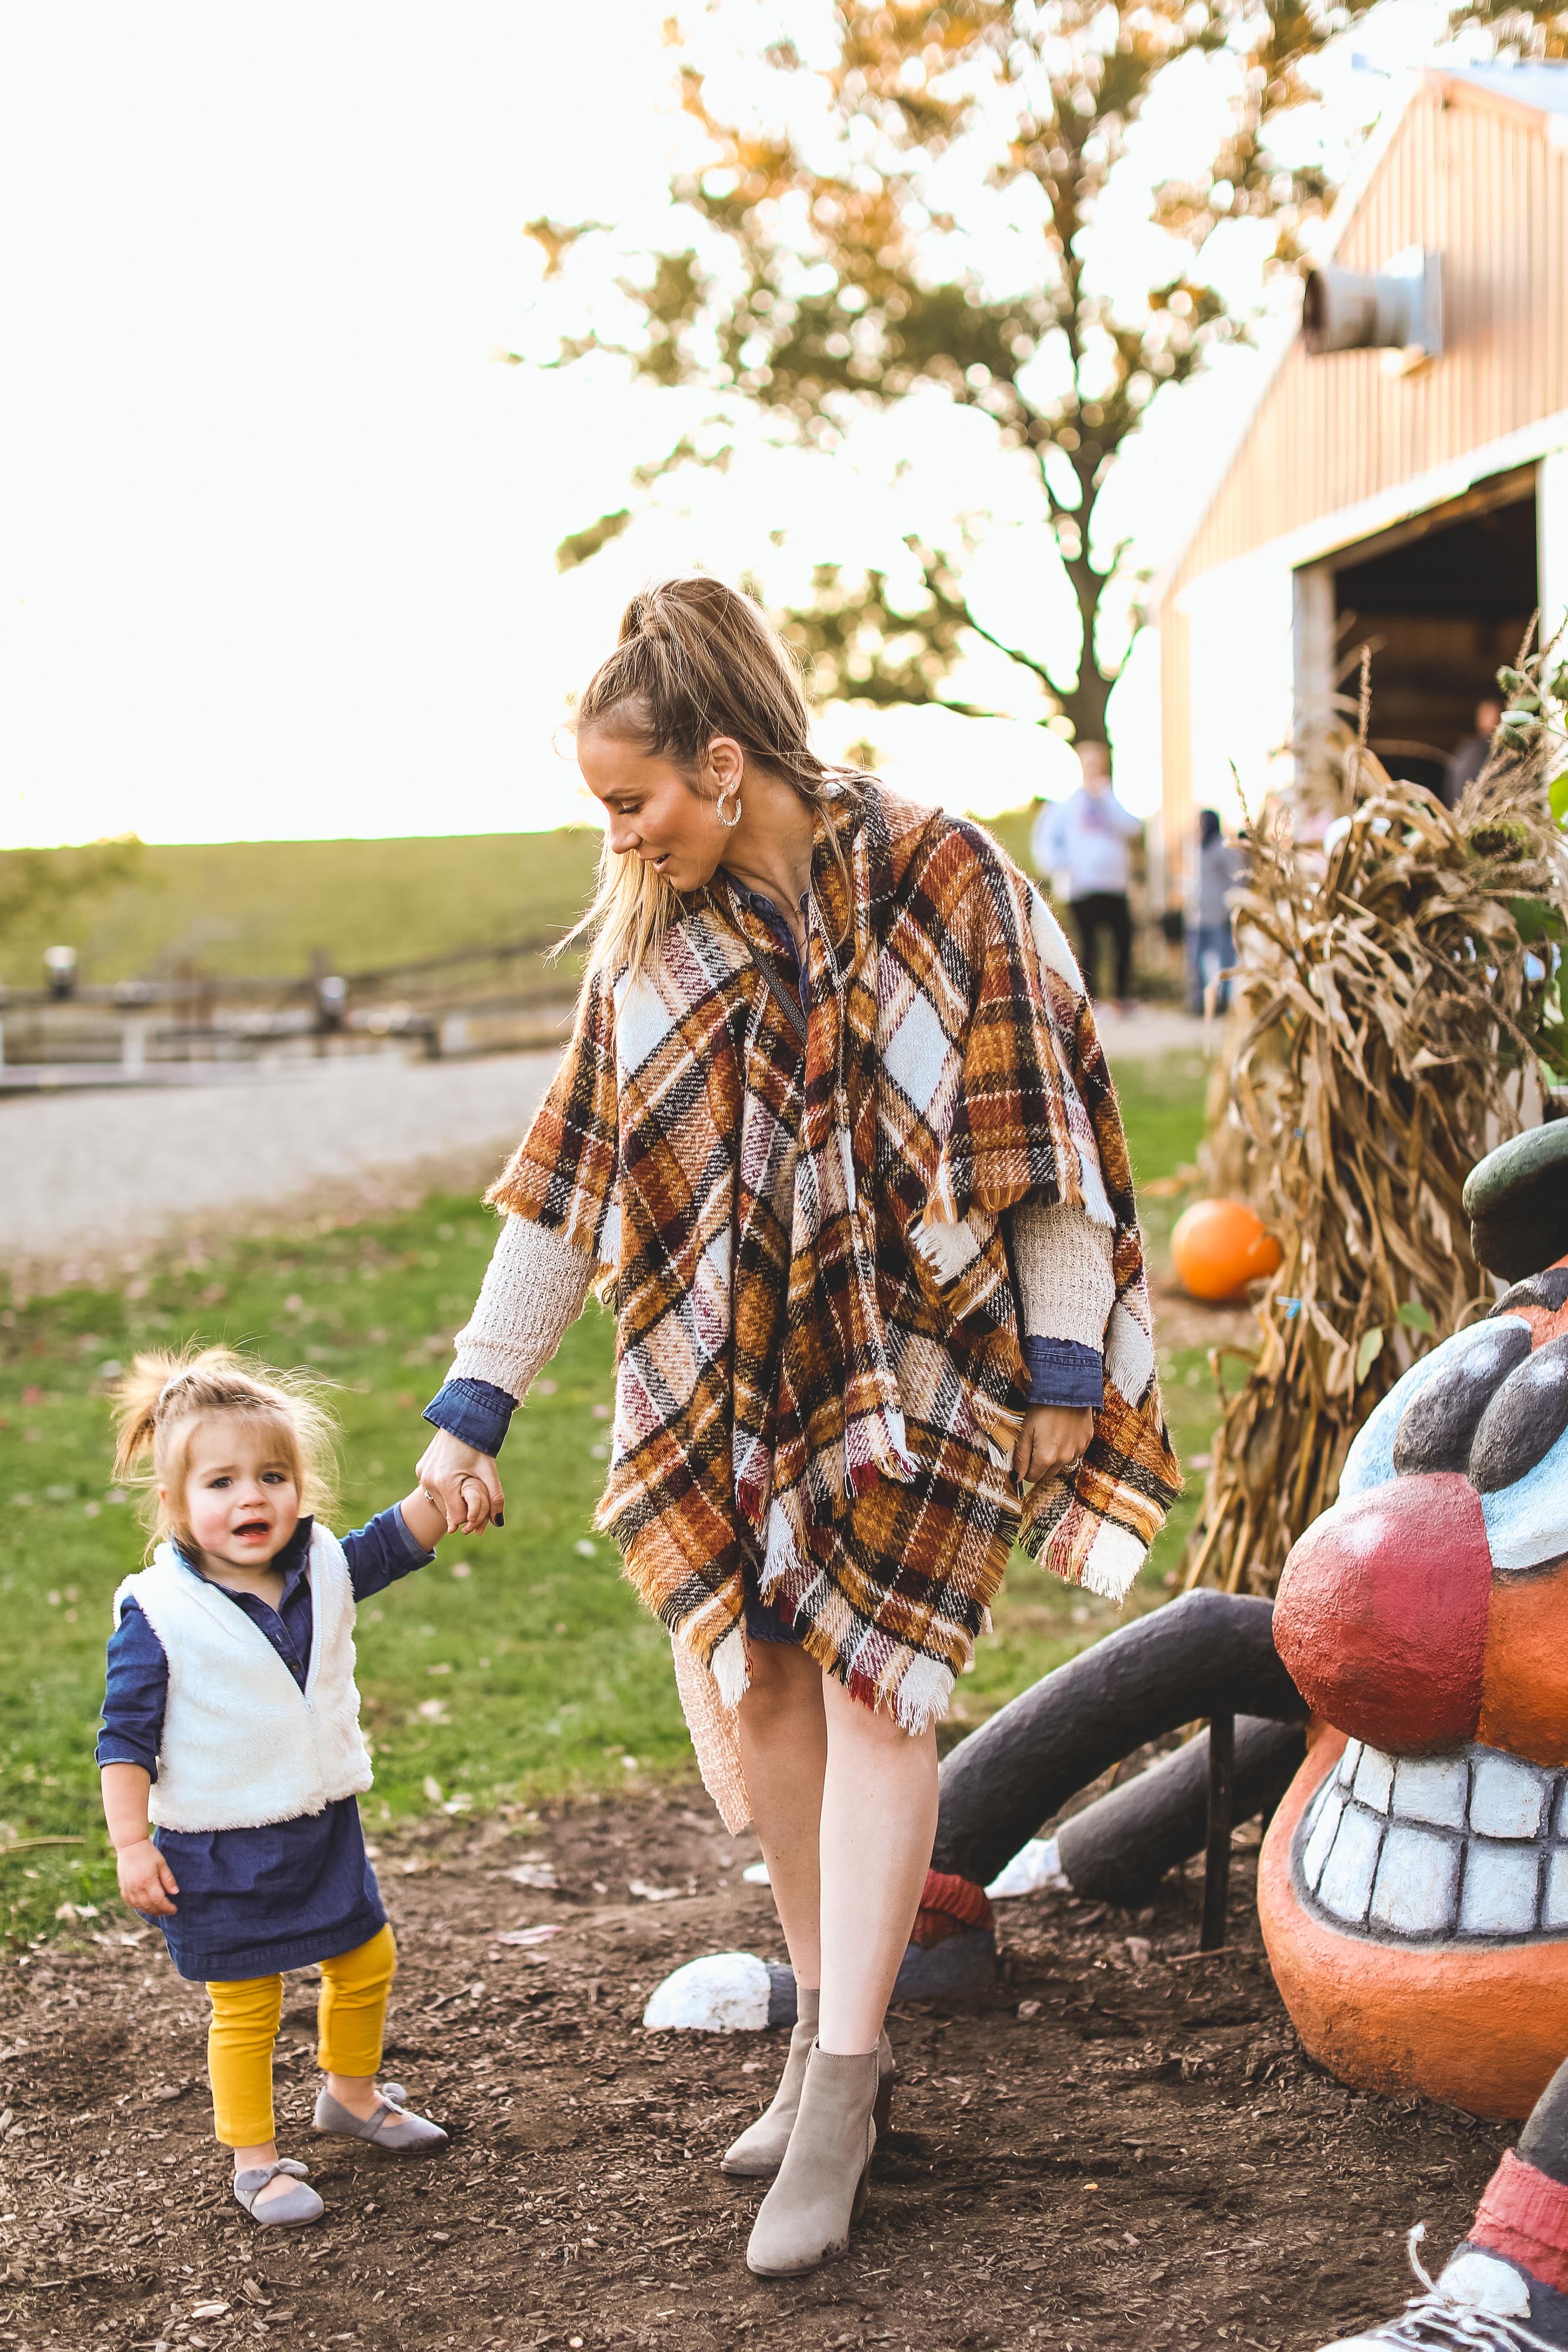 What We Wore to the Pumpkin Patch Casual Fall Outfits angela lanter hello gorgeous